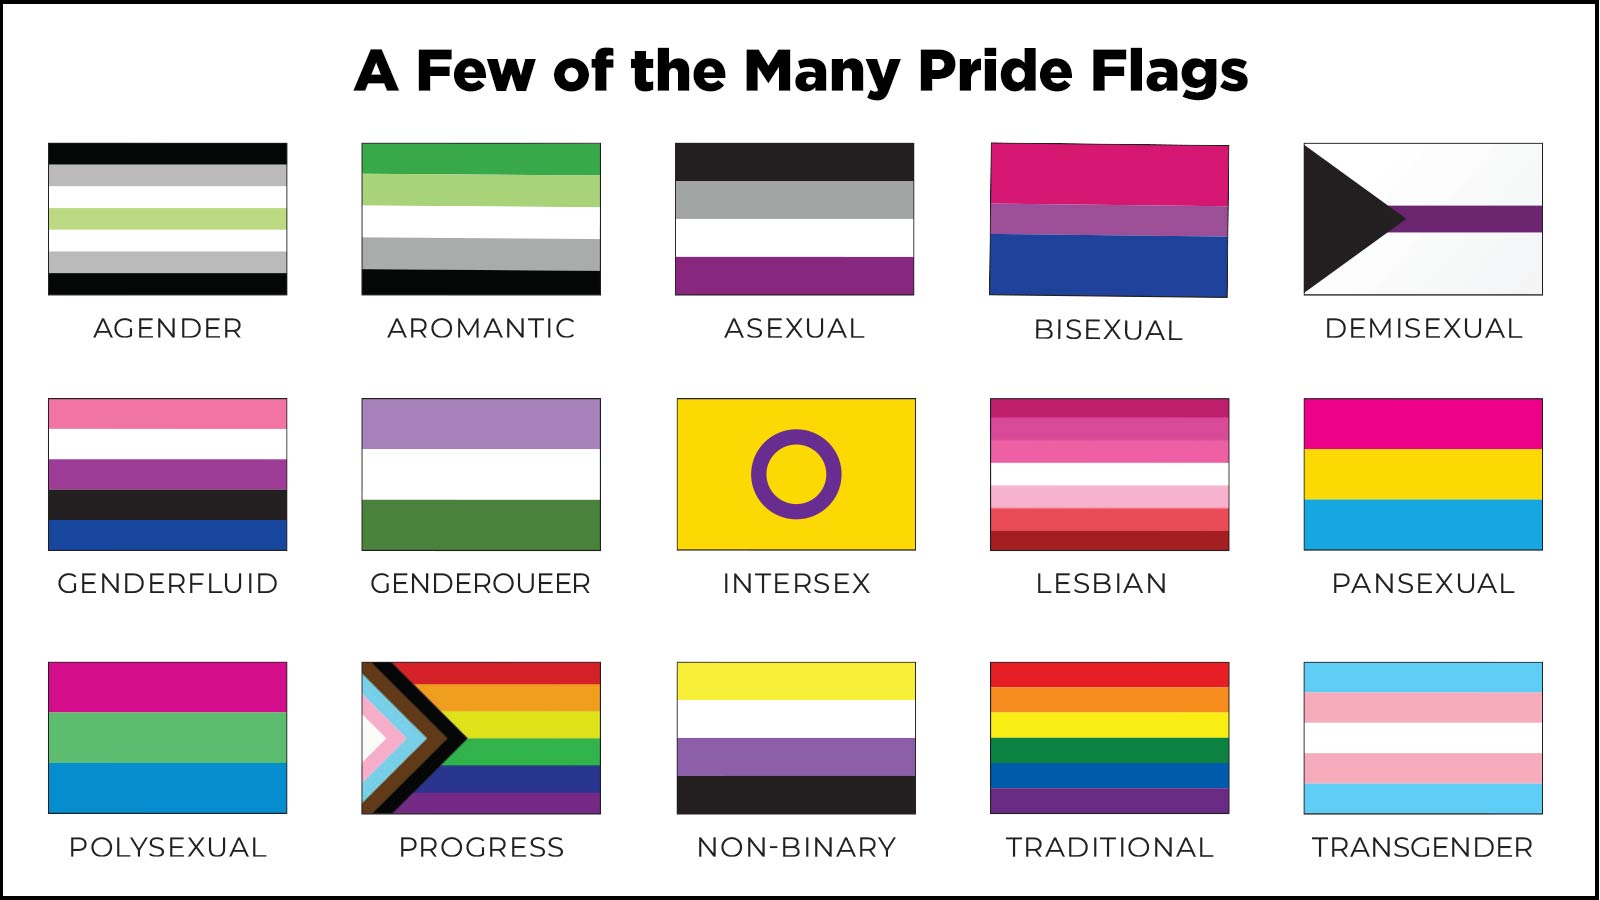 A few of the many Pride Flags, including Agender, Aromantic, Asexual, Bisexual, Demisexual, Genderfluid, Genderoueer, Intersex, Lesbian, Pansexual, Polysexual, Progress, Non-Binary, Traditional, and Transgender